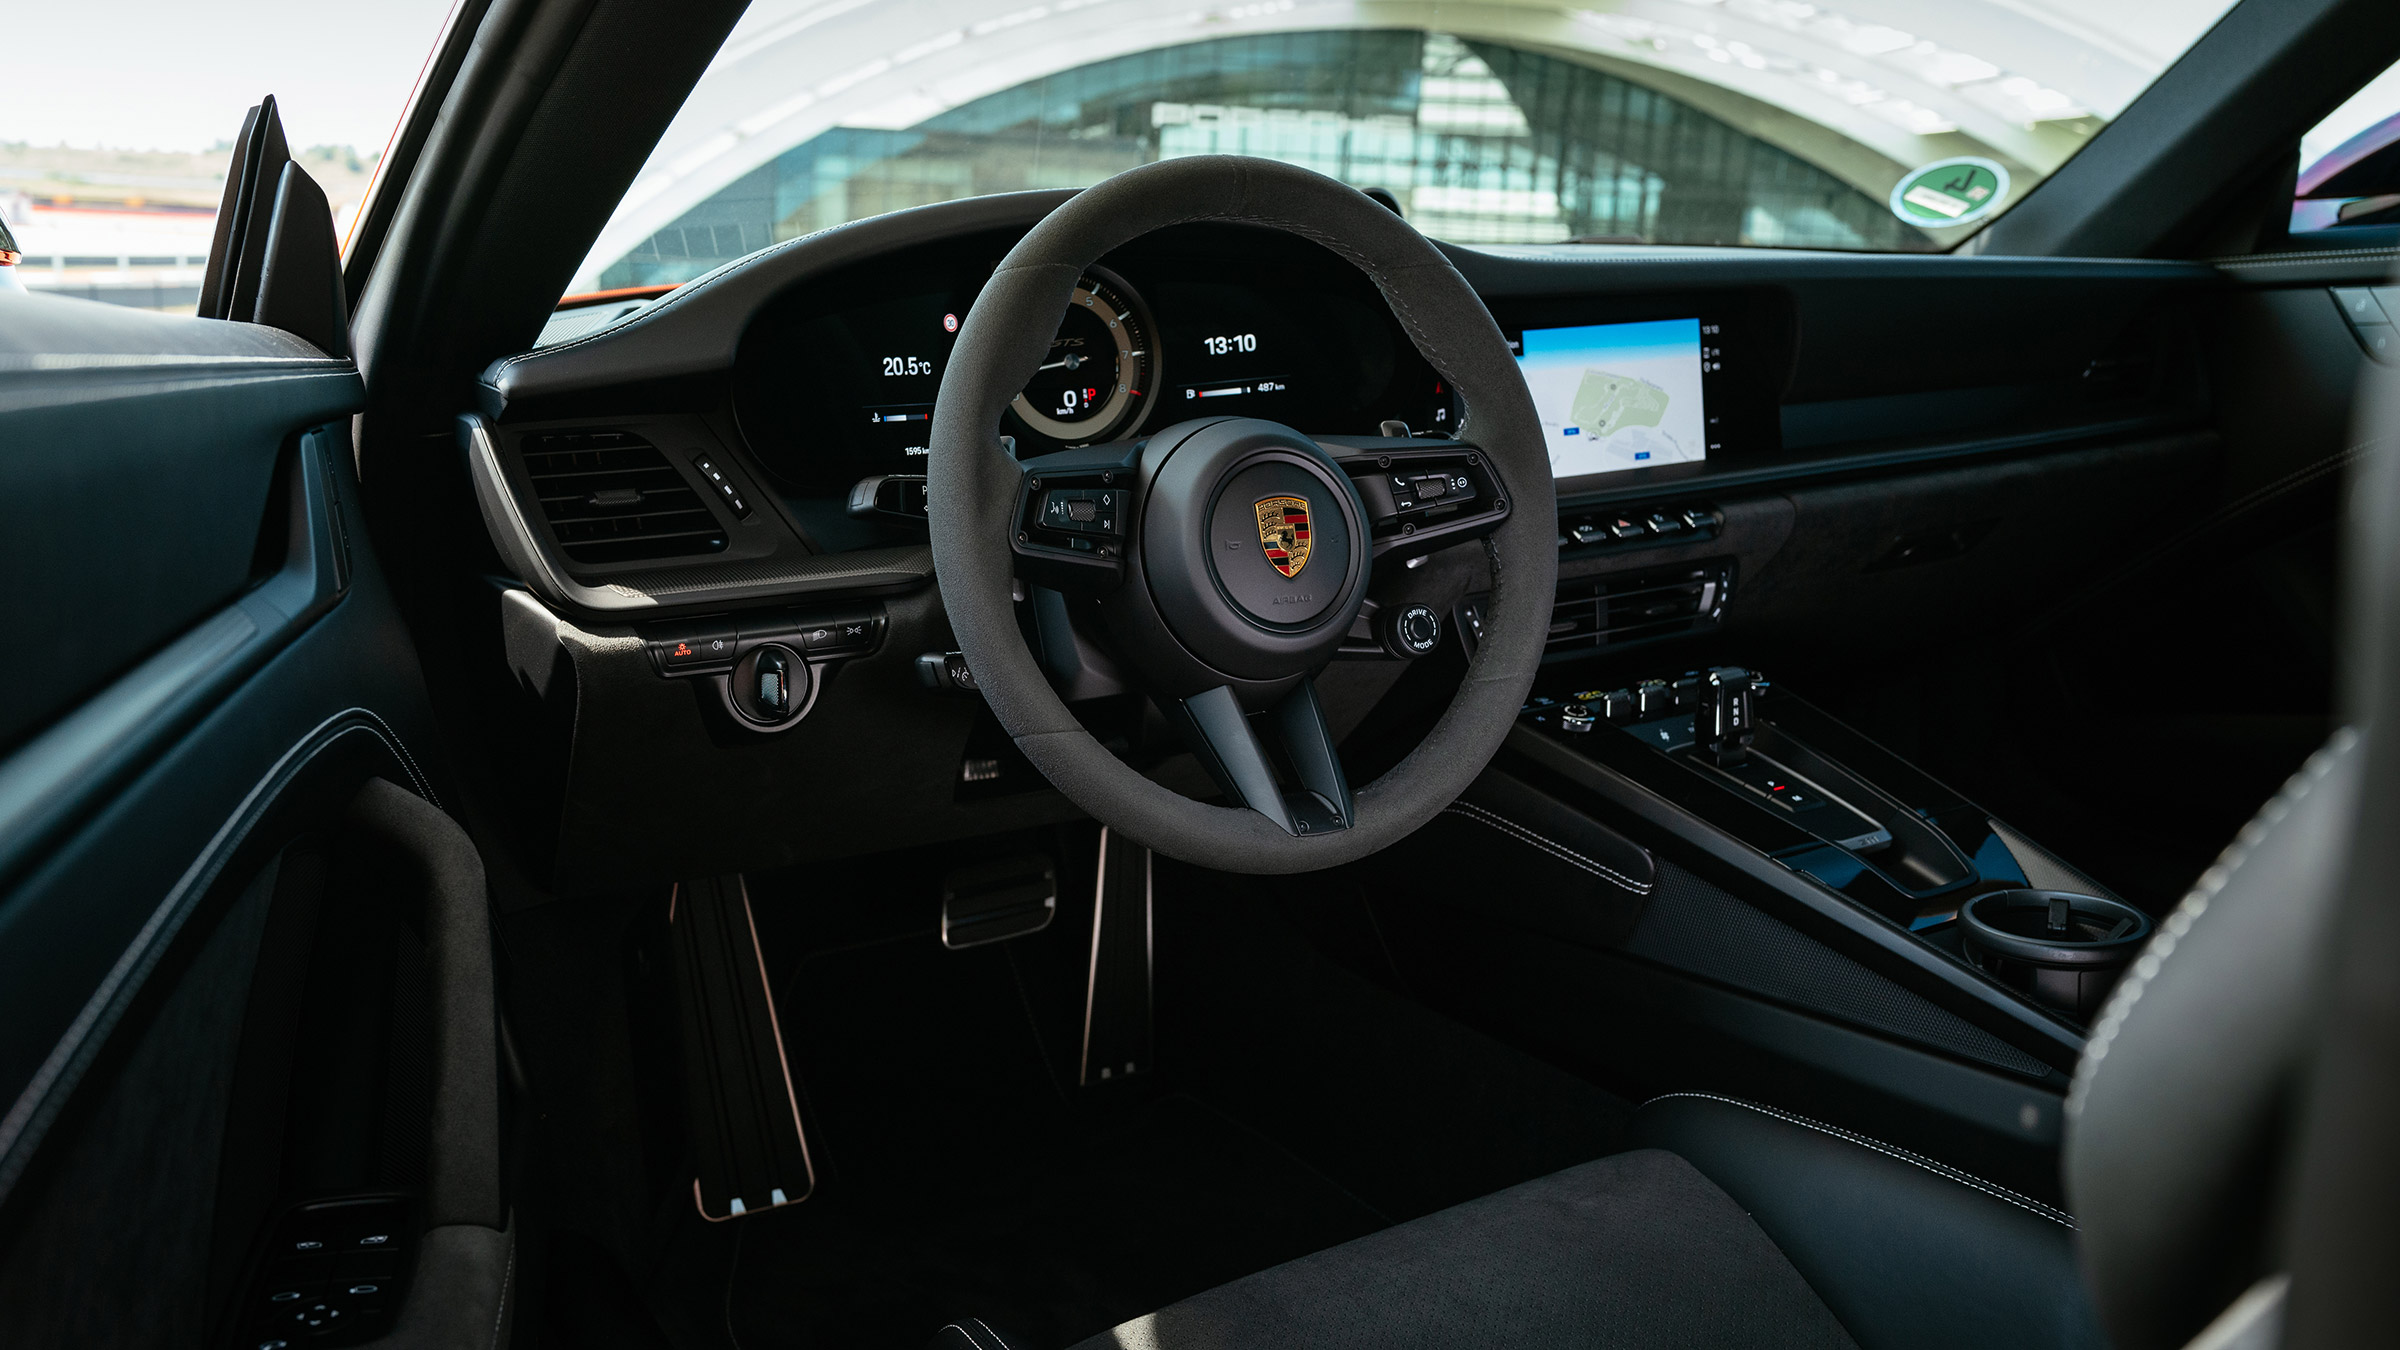 Porsche 911 Carrera 4 GTS 2022 review – middle child 992 shapes up | evo